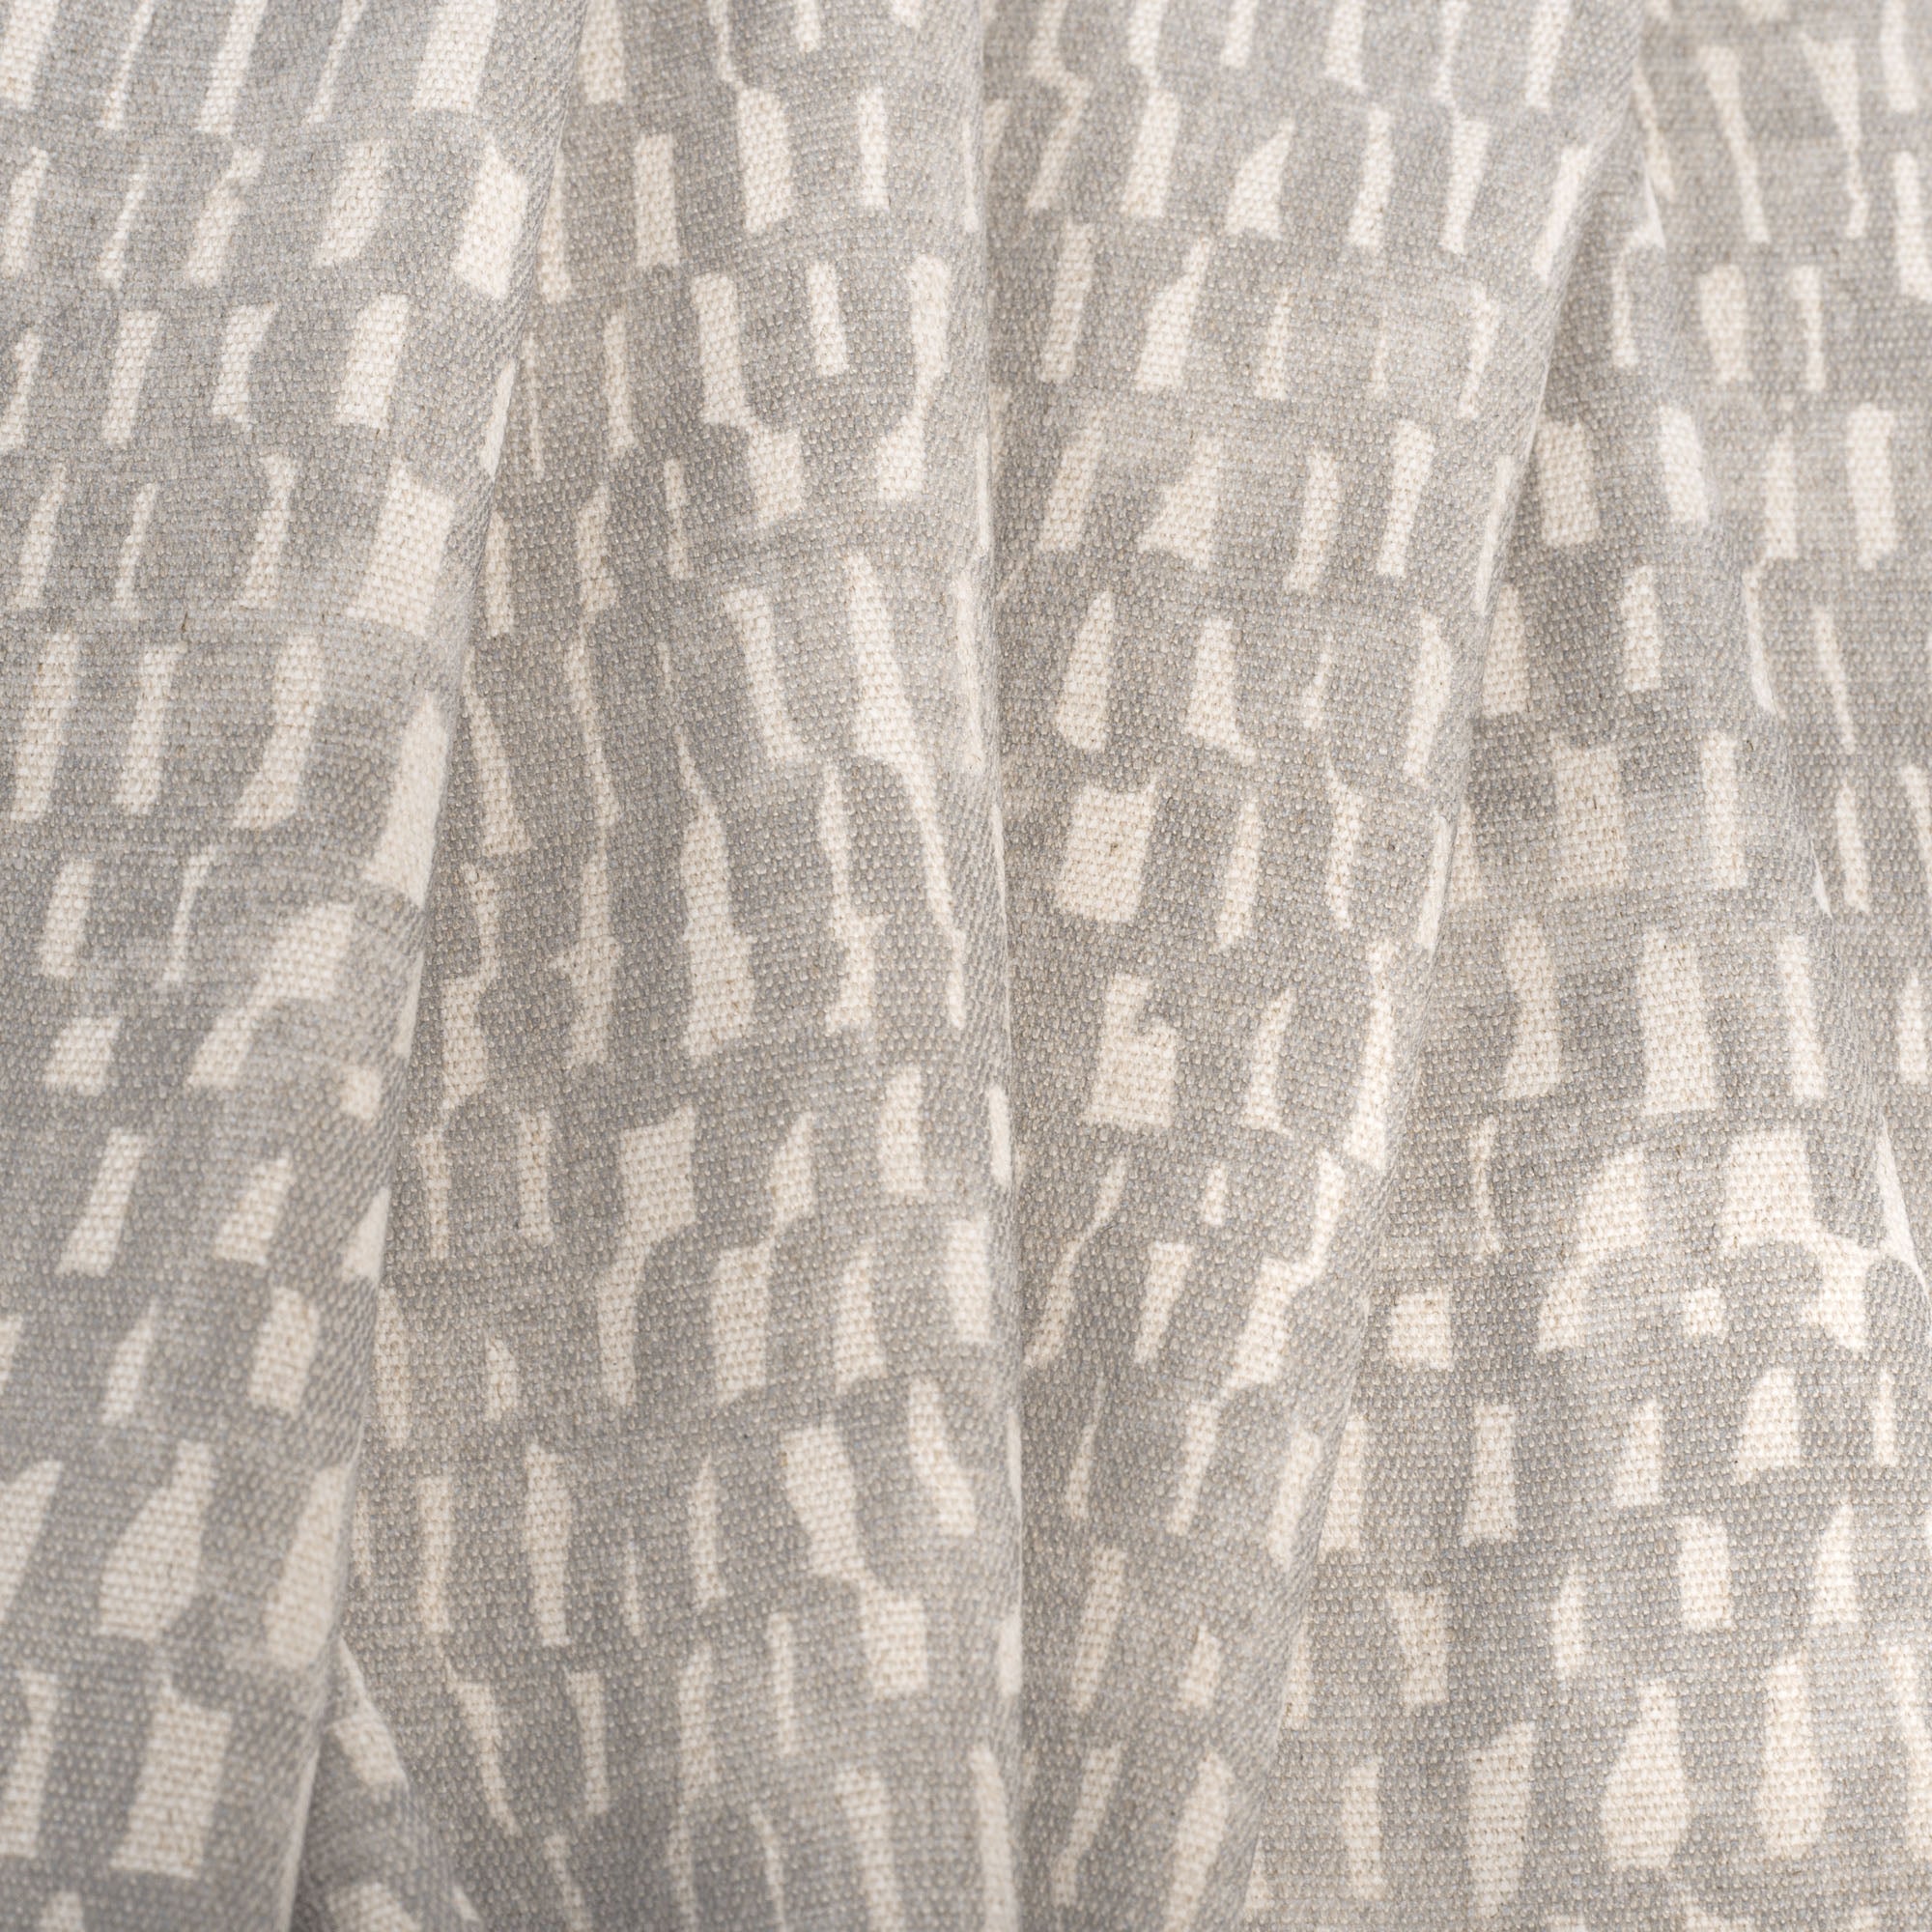 Avareno Silver, a light gray and sandy beige small scale abstract print fabric : close up